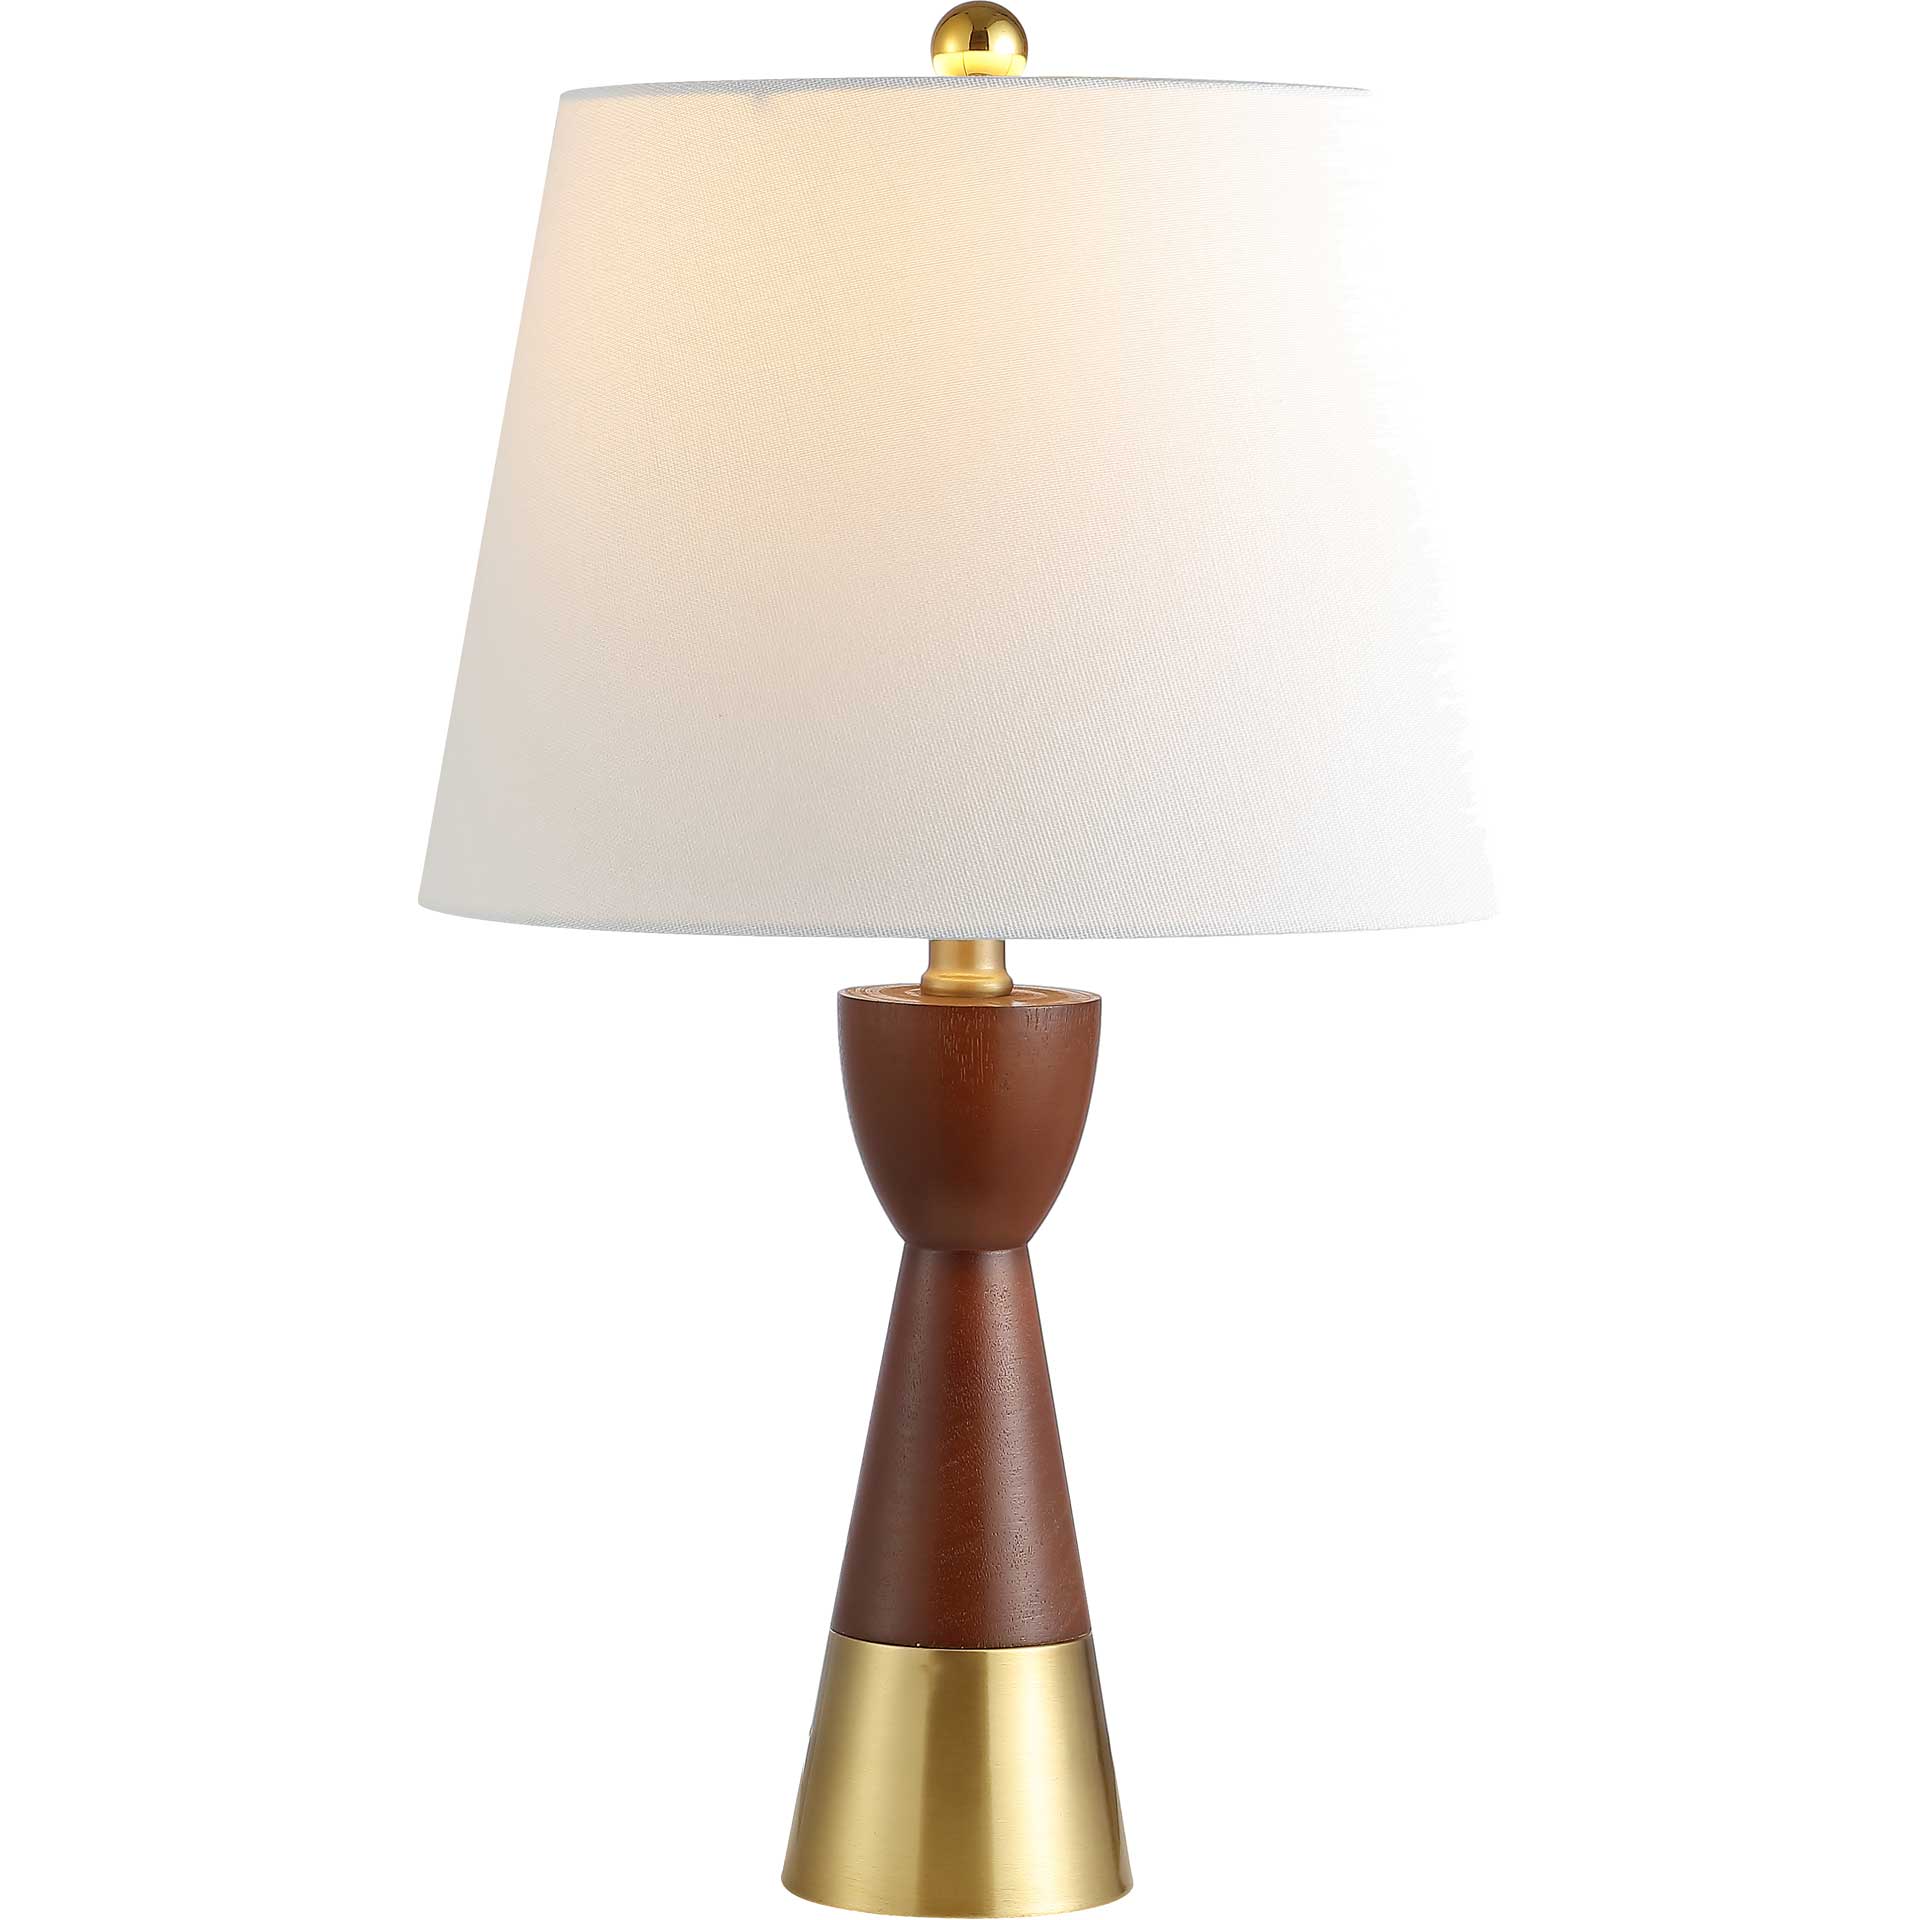 Retro Table Lamps Brown/Brass Gold (Set of 2)